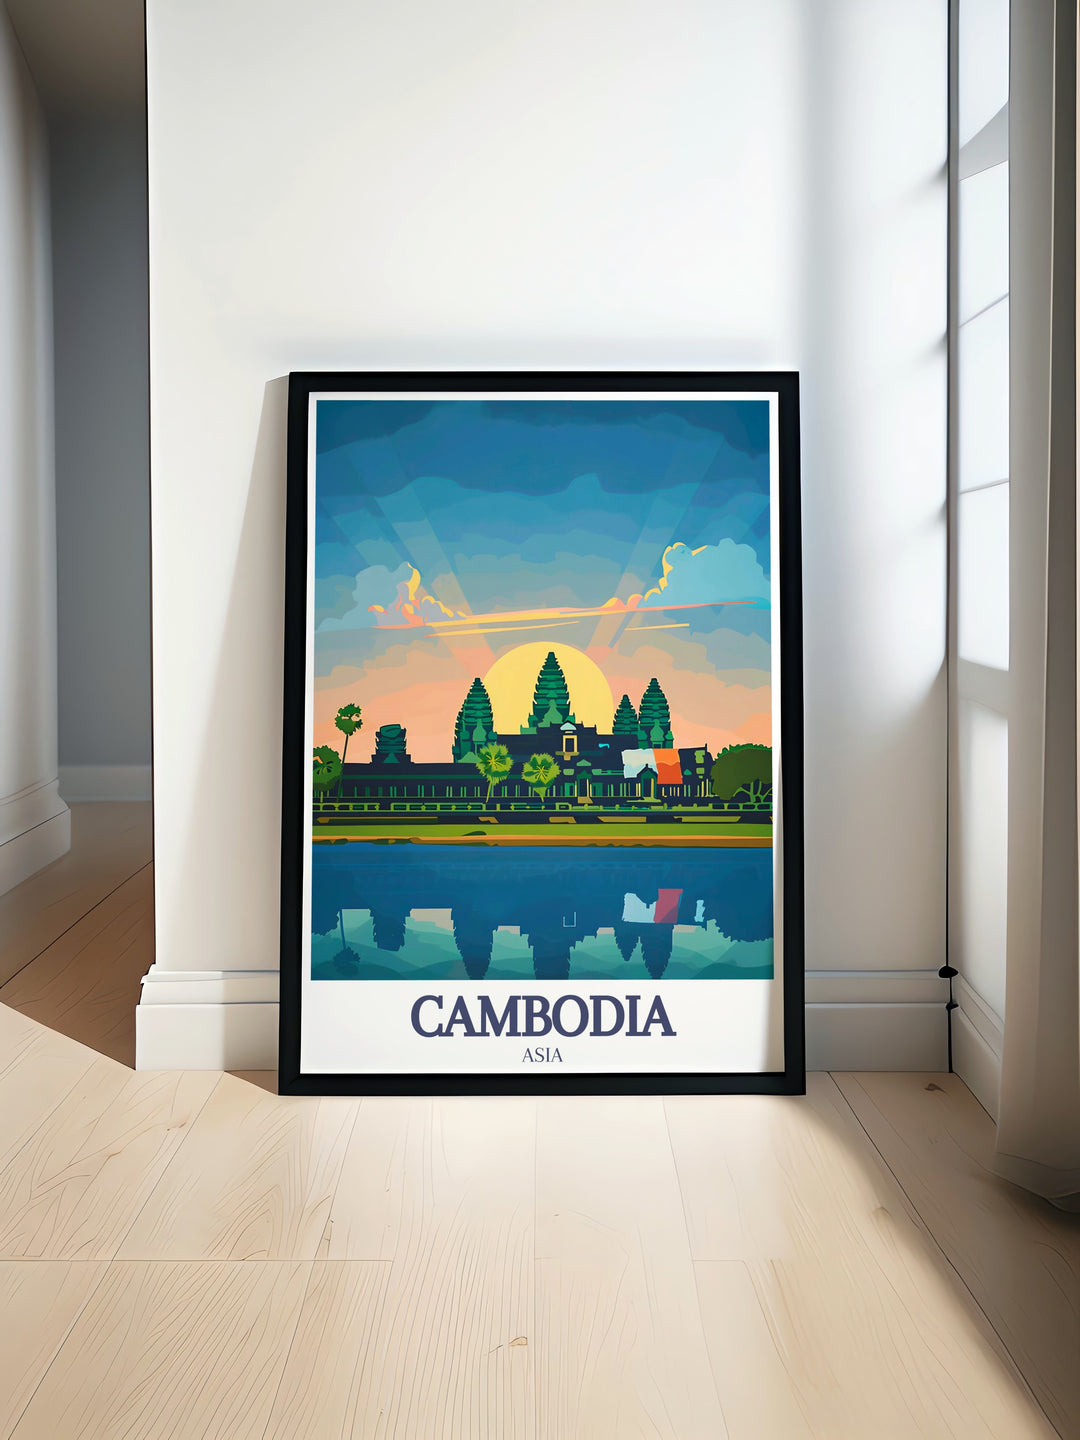 Angkor Wat Khmer travel poster showcasing the iconic temple in Siem Reap. Perfect for lovers of Southeast Asia and Cambodia wall art. This beautiful illustration highlights the architectural grandeur and historical significance of the Angkor Wat temple.